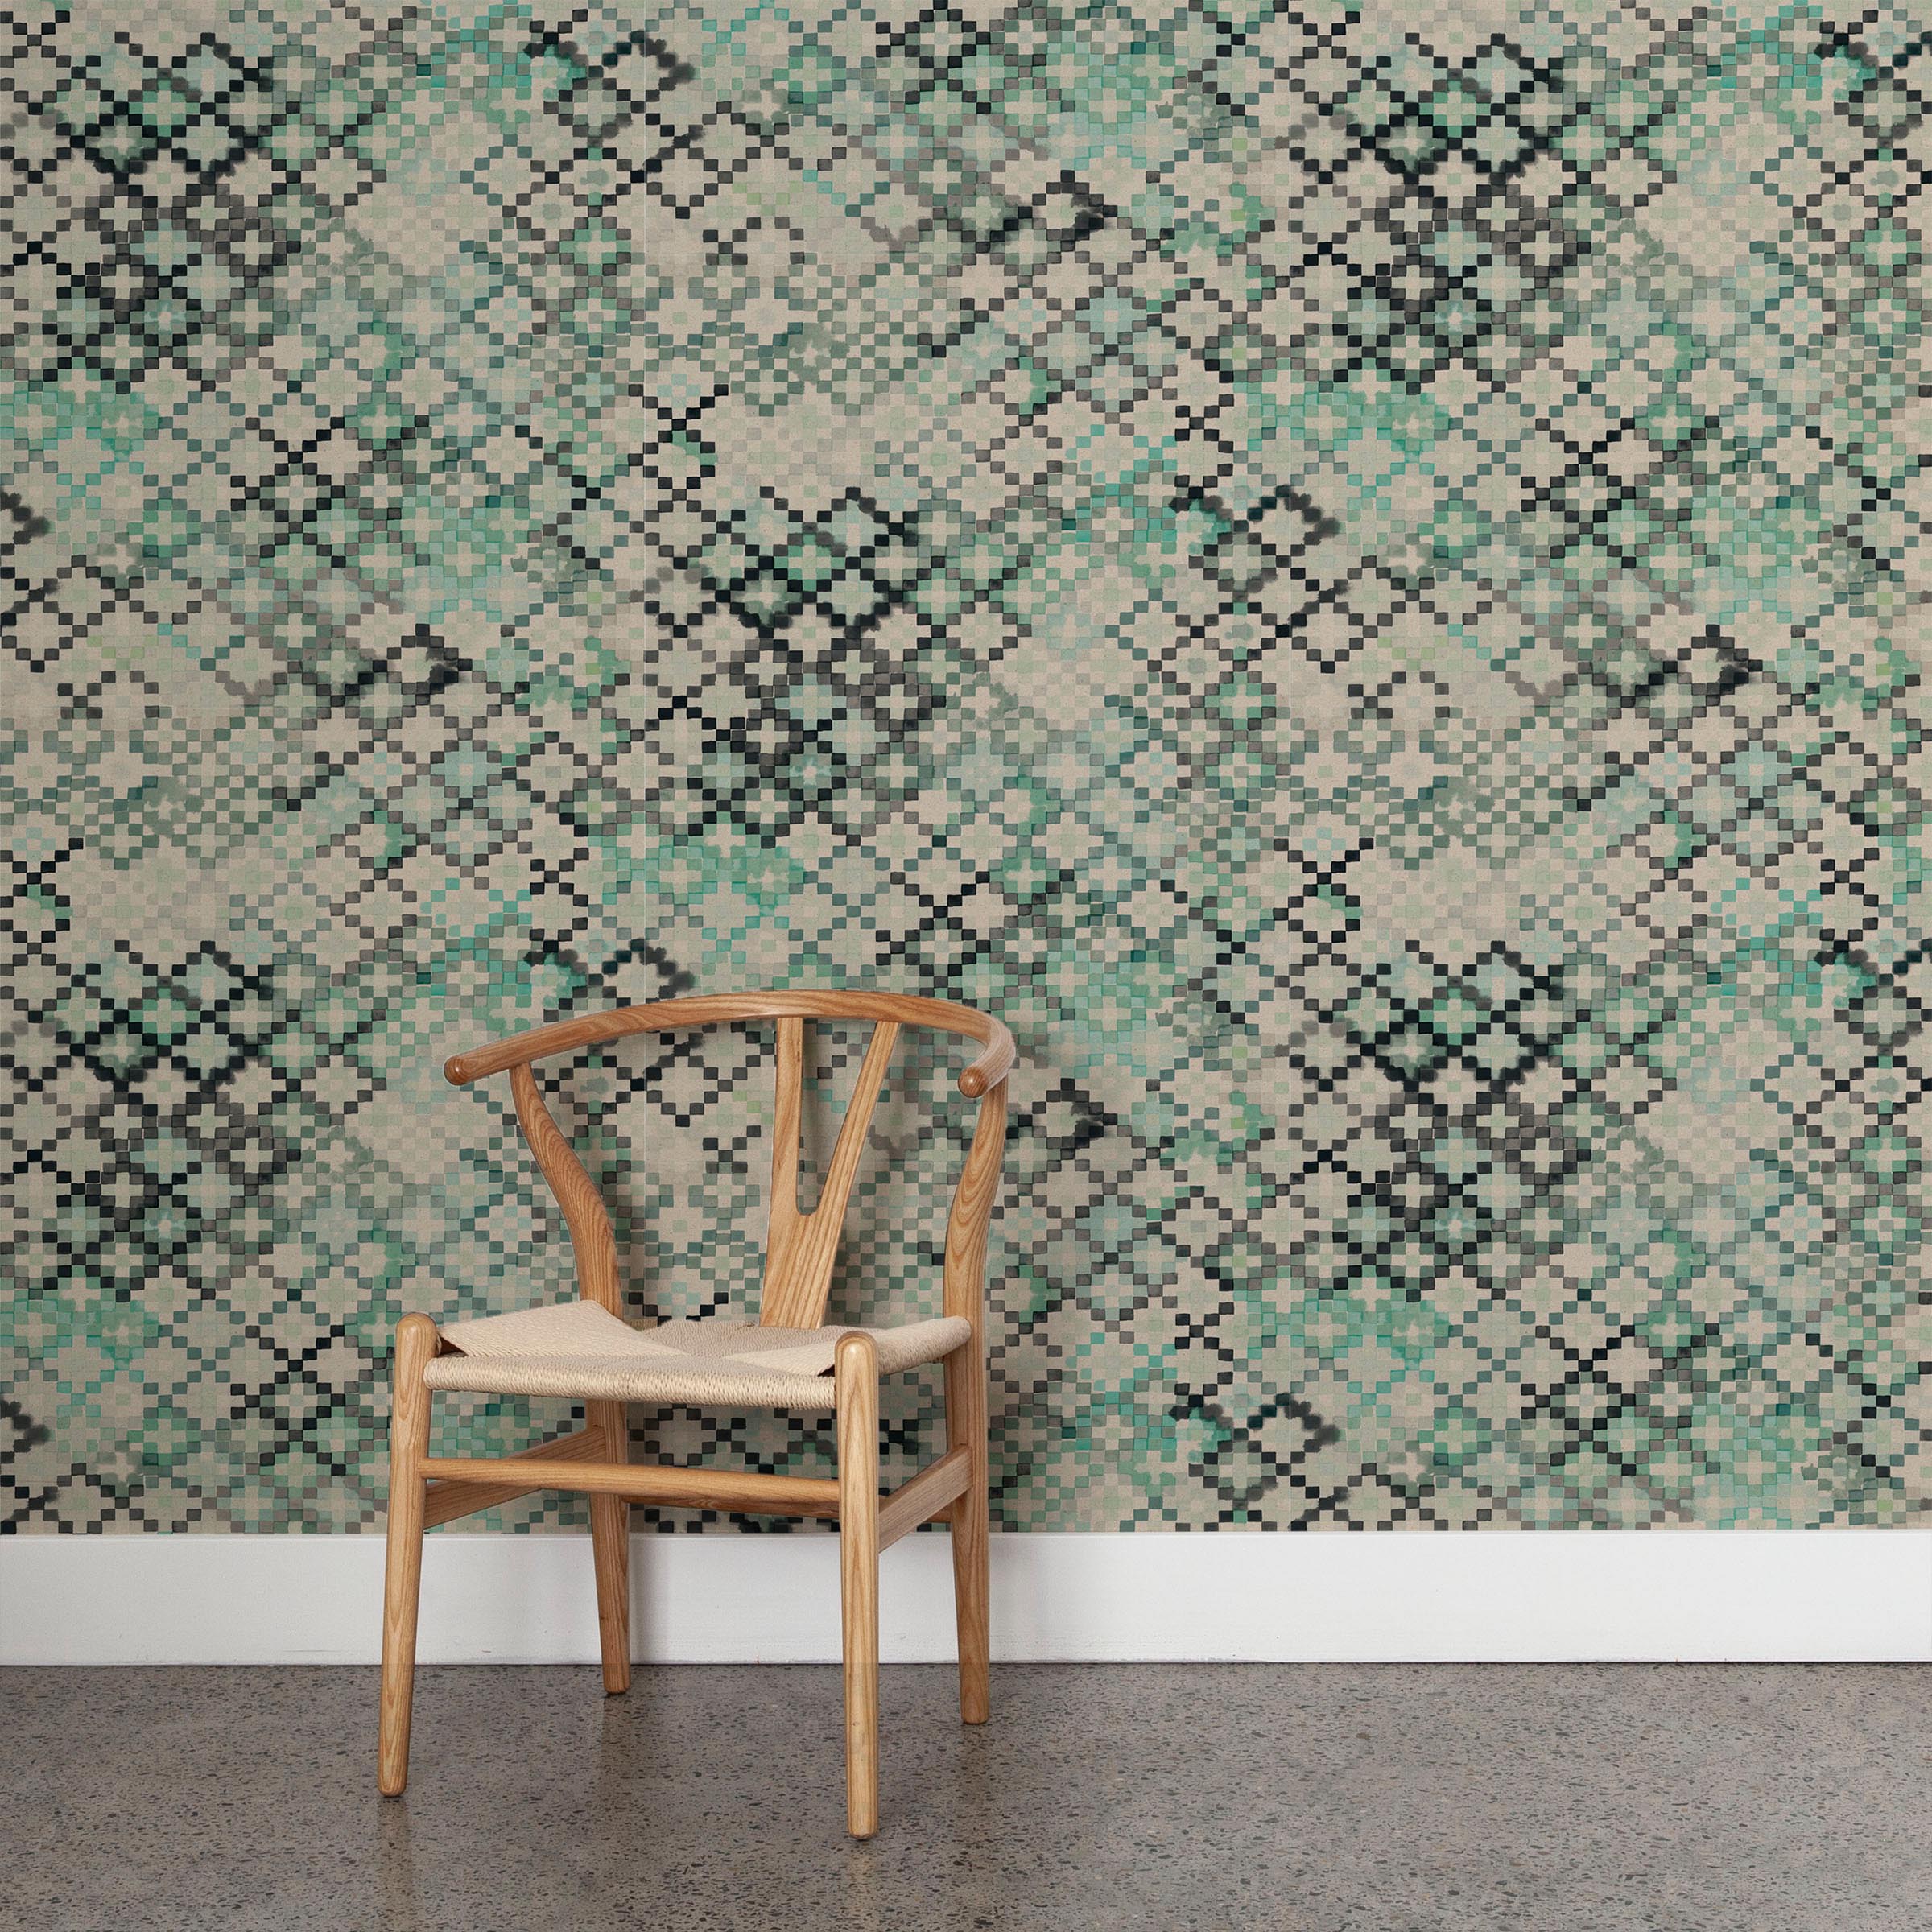 A wooden chair stands in front of a wall papered in a diamond checked pattern in shades of cream, gray and green.